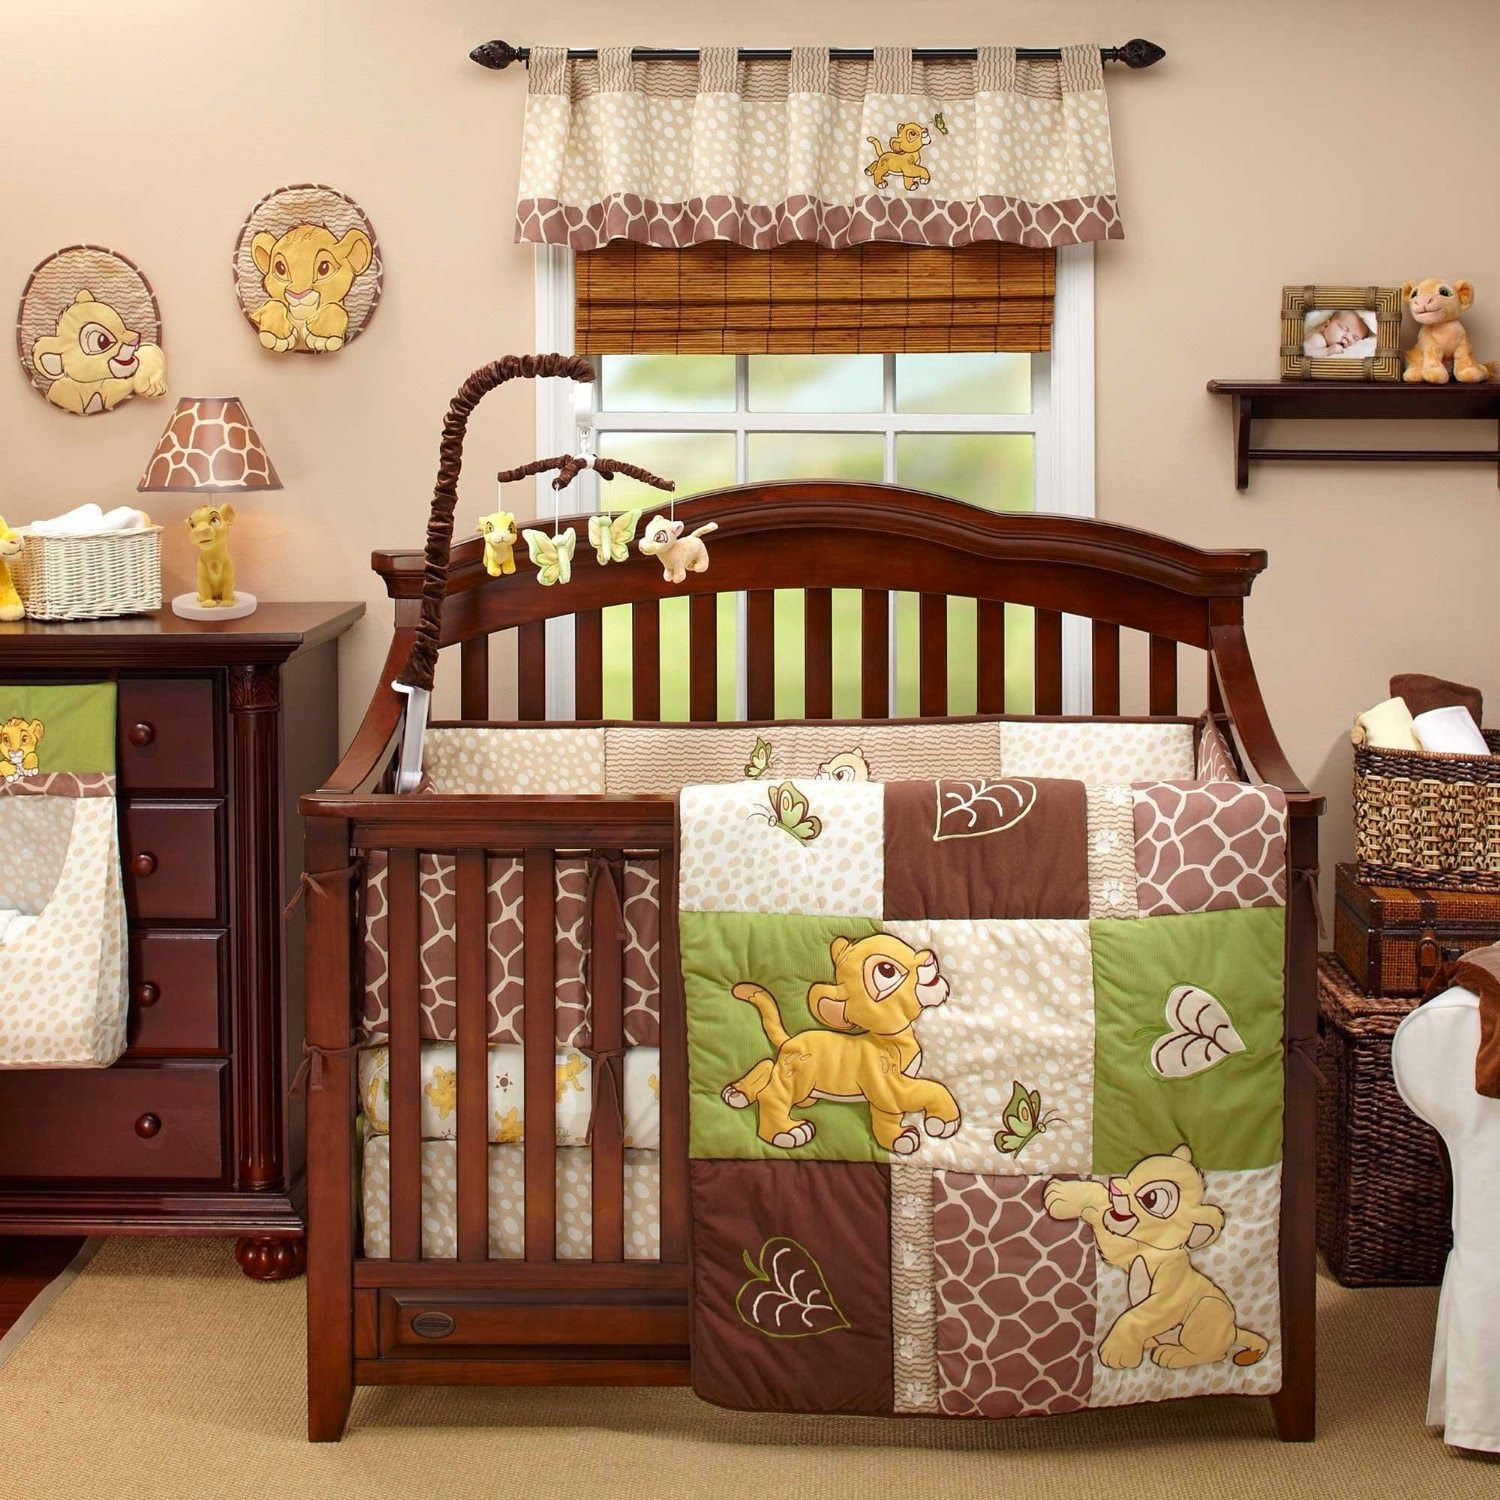 We found a ton of Lion King Baby Nursery Decor and Crib Sets!